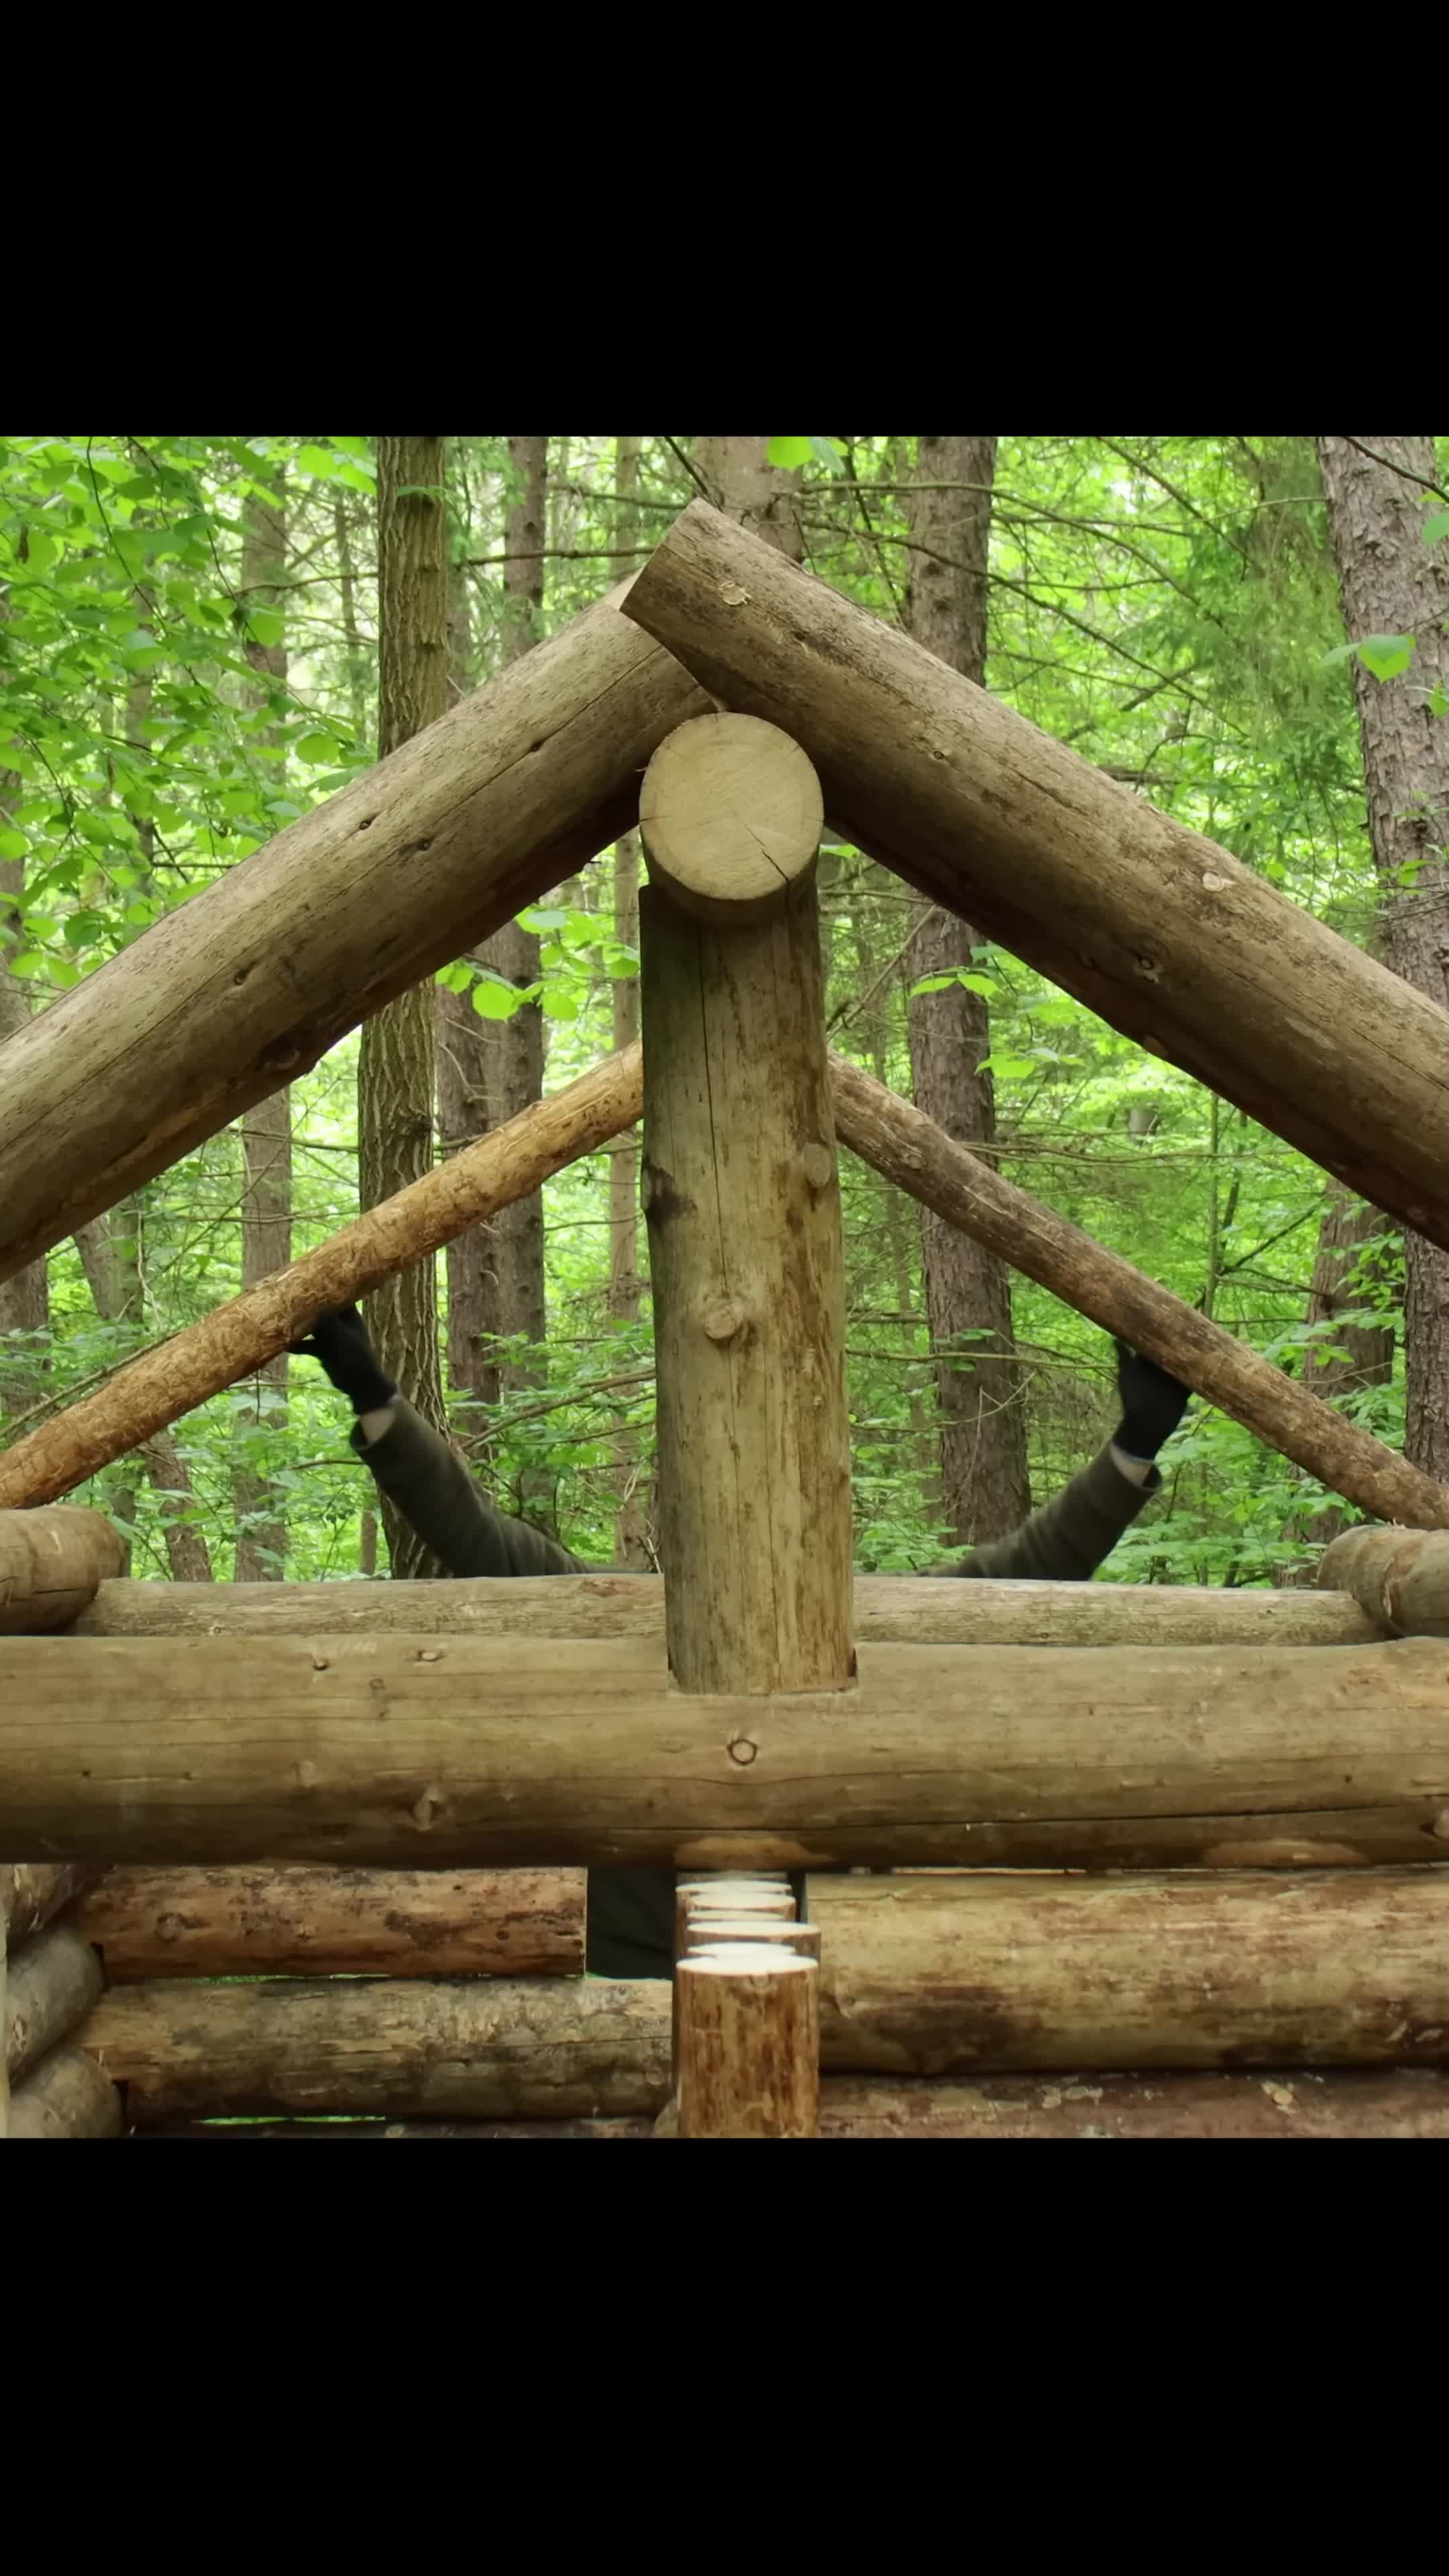 Building a Log Shelter in the Atmospheric Forest _ FULL VIDEO ON MY CHANNEL